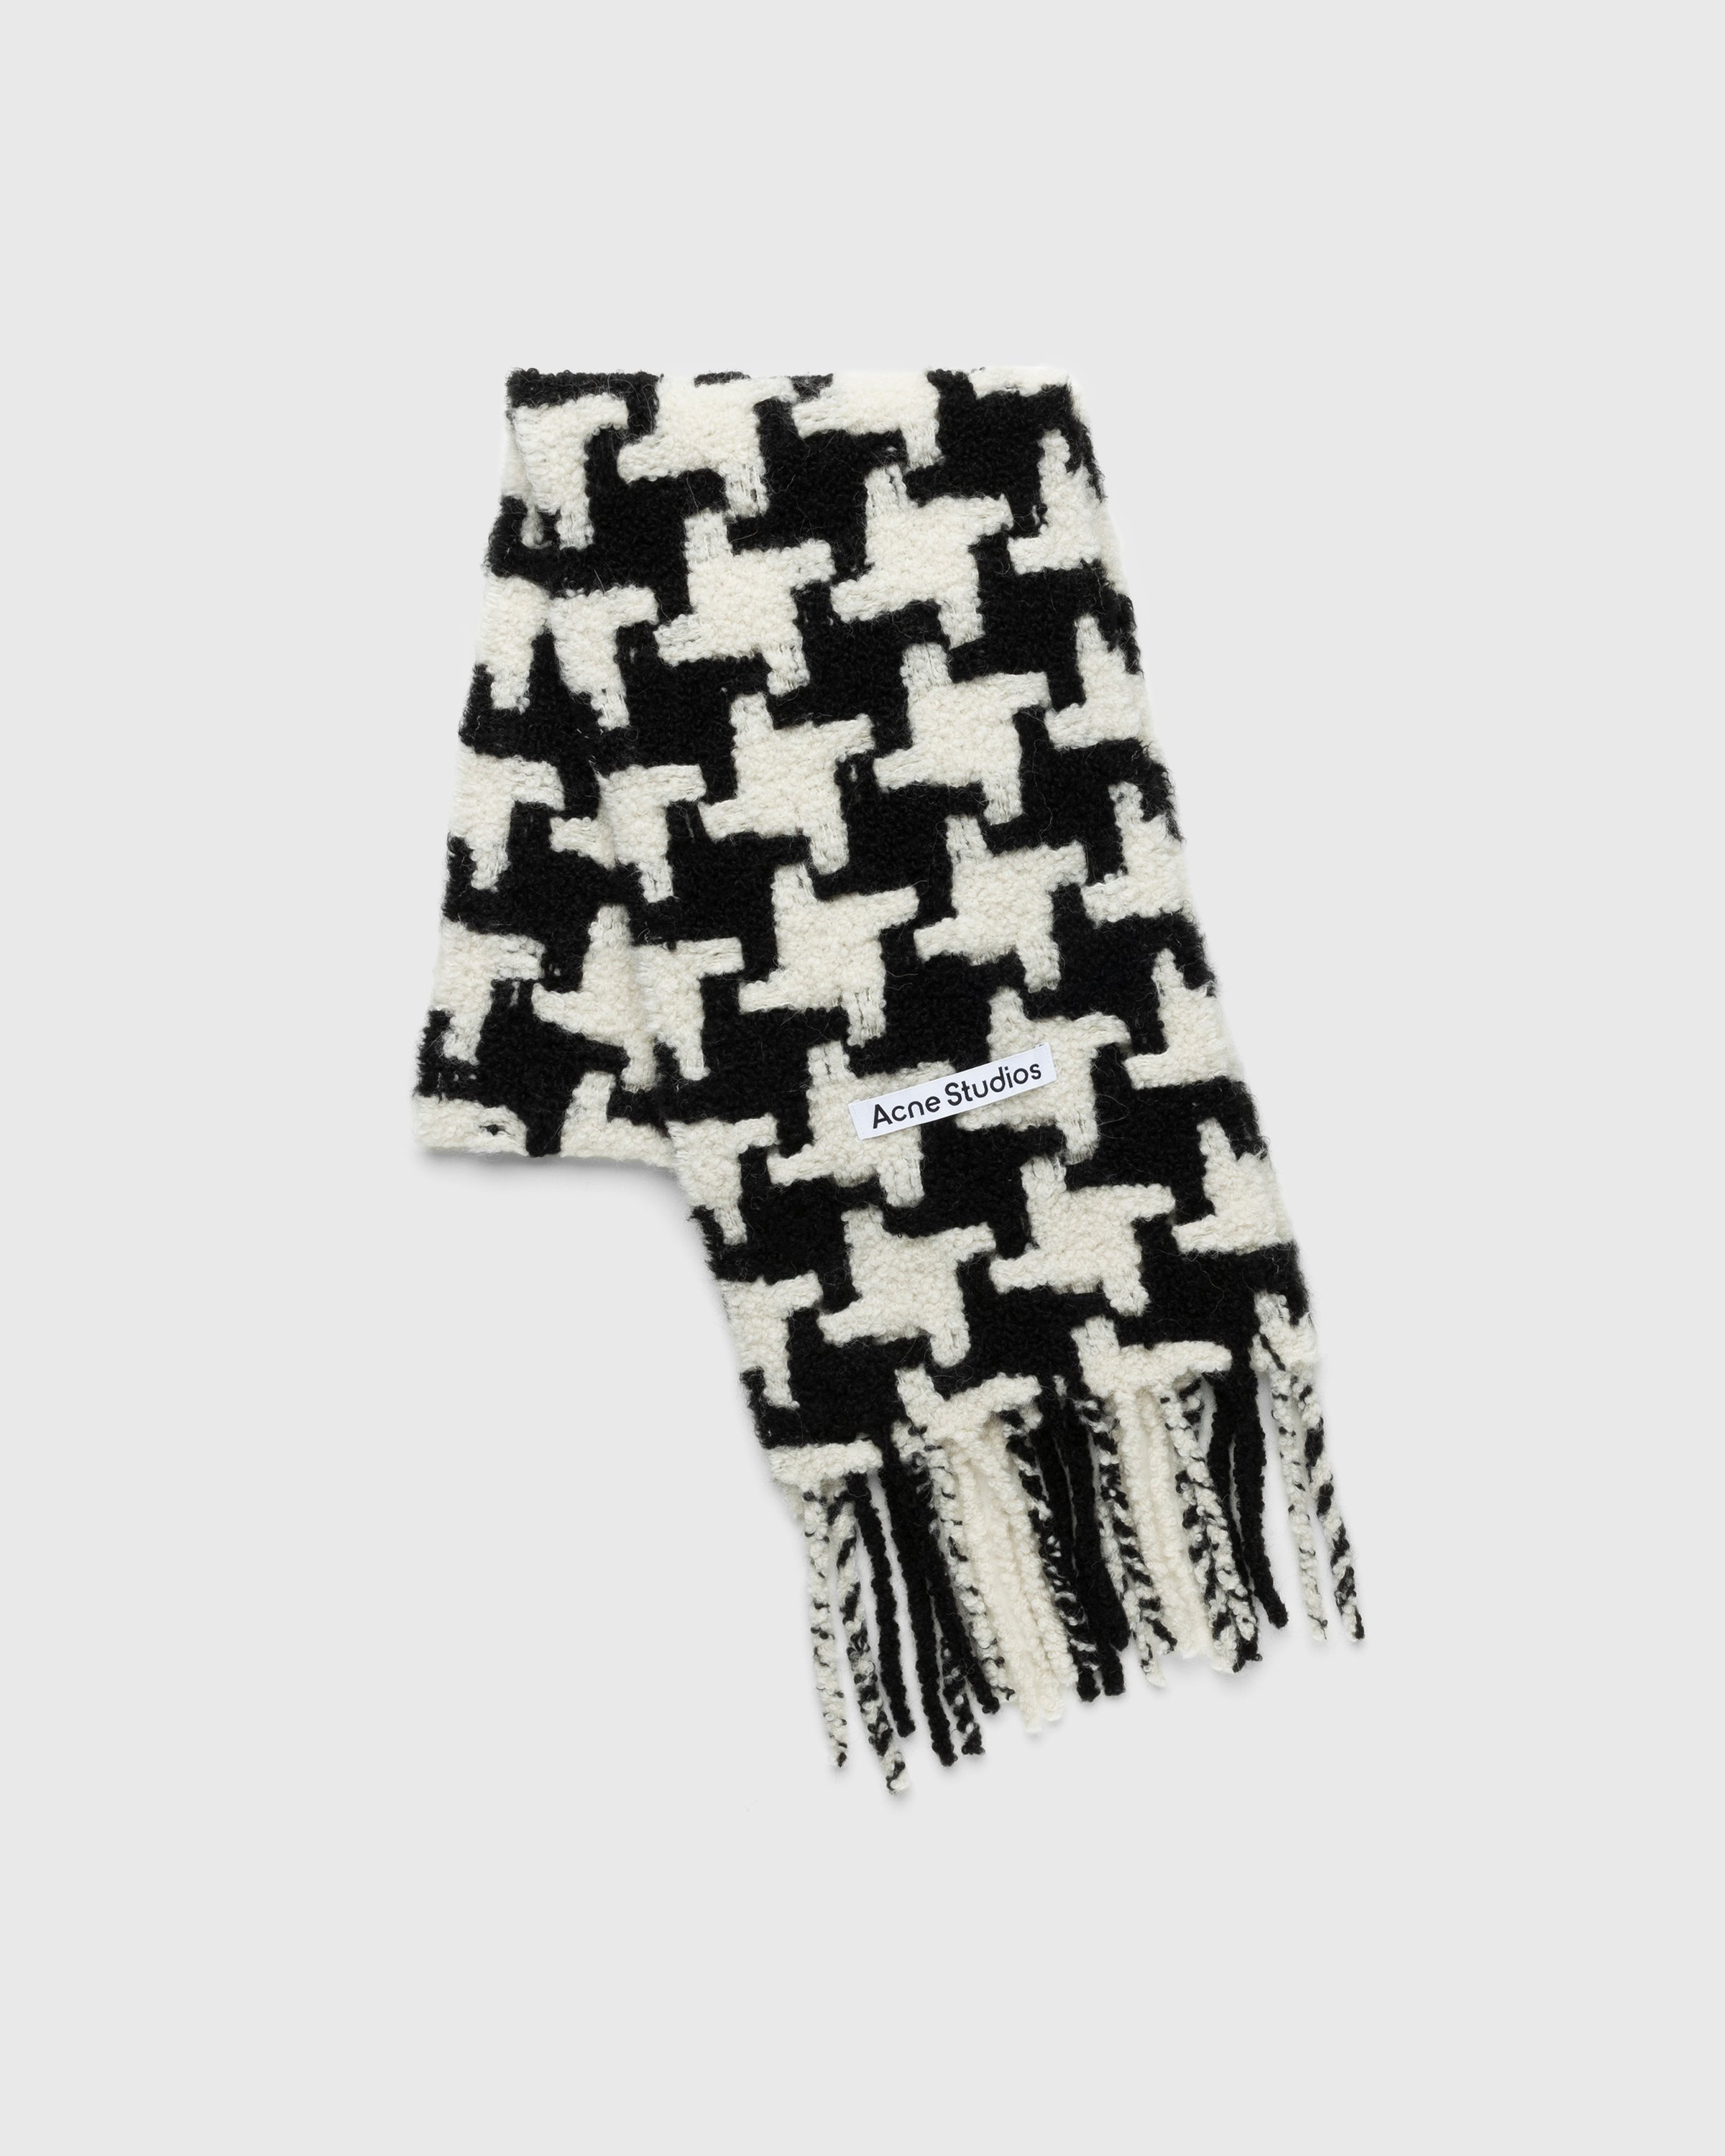 Acne Studios - Houndstooth Scarf White/Black - Accessories - Black - Image 2